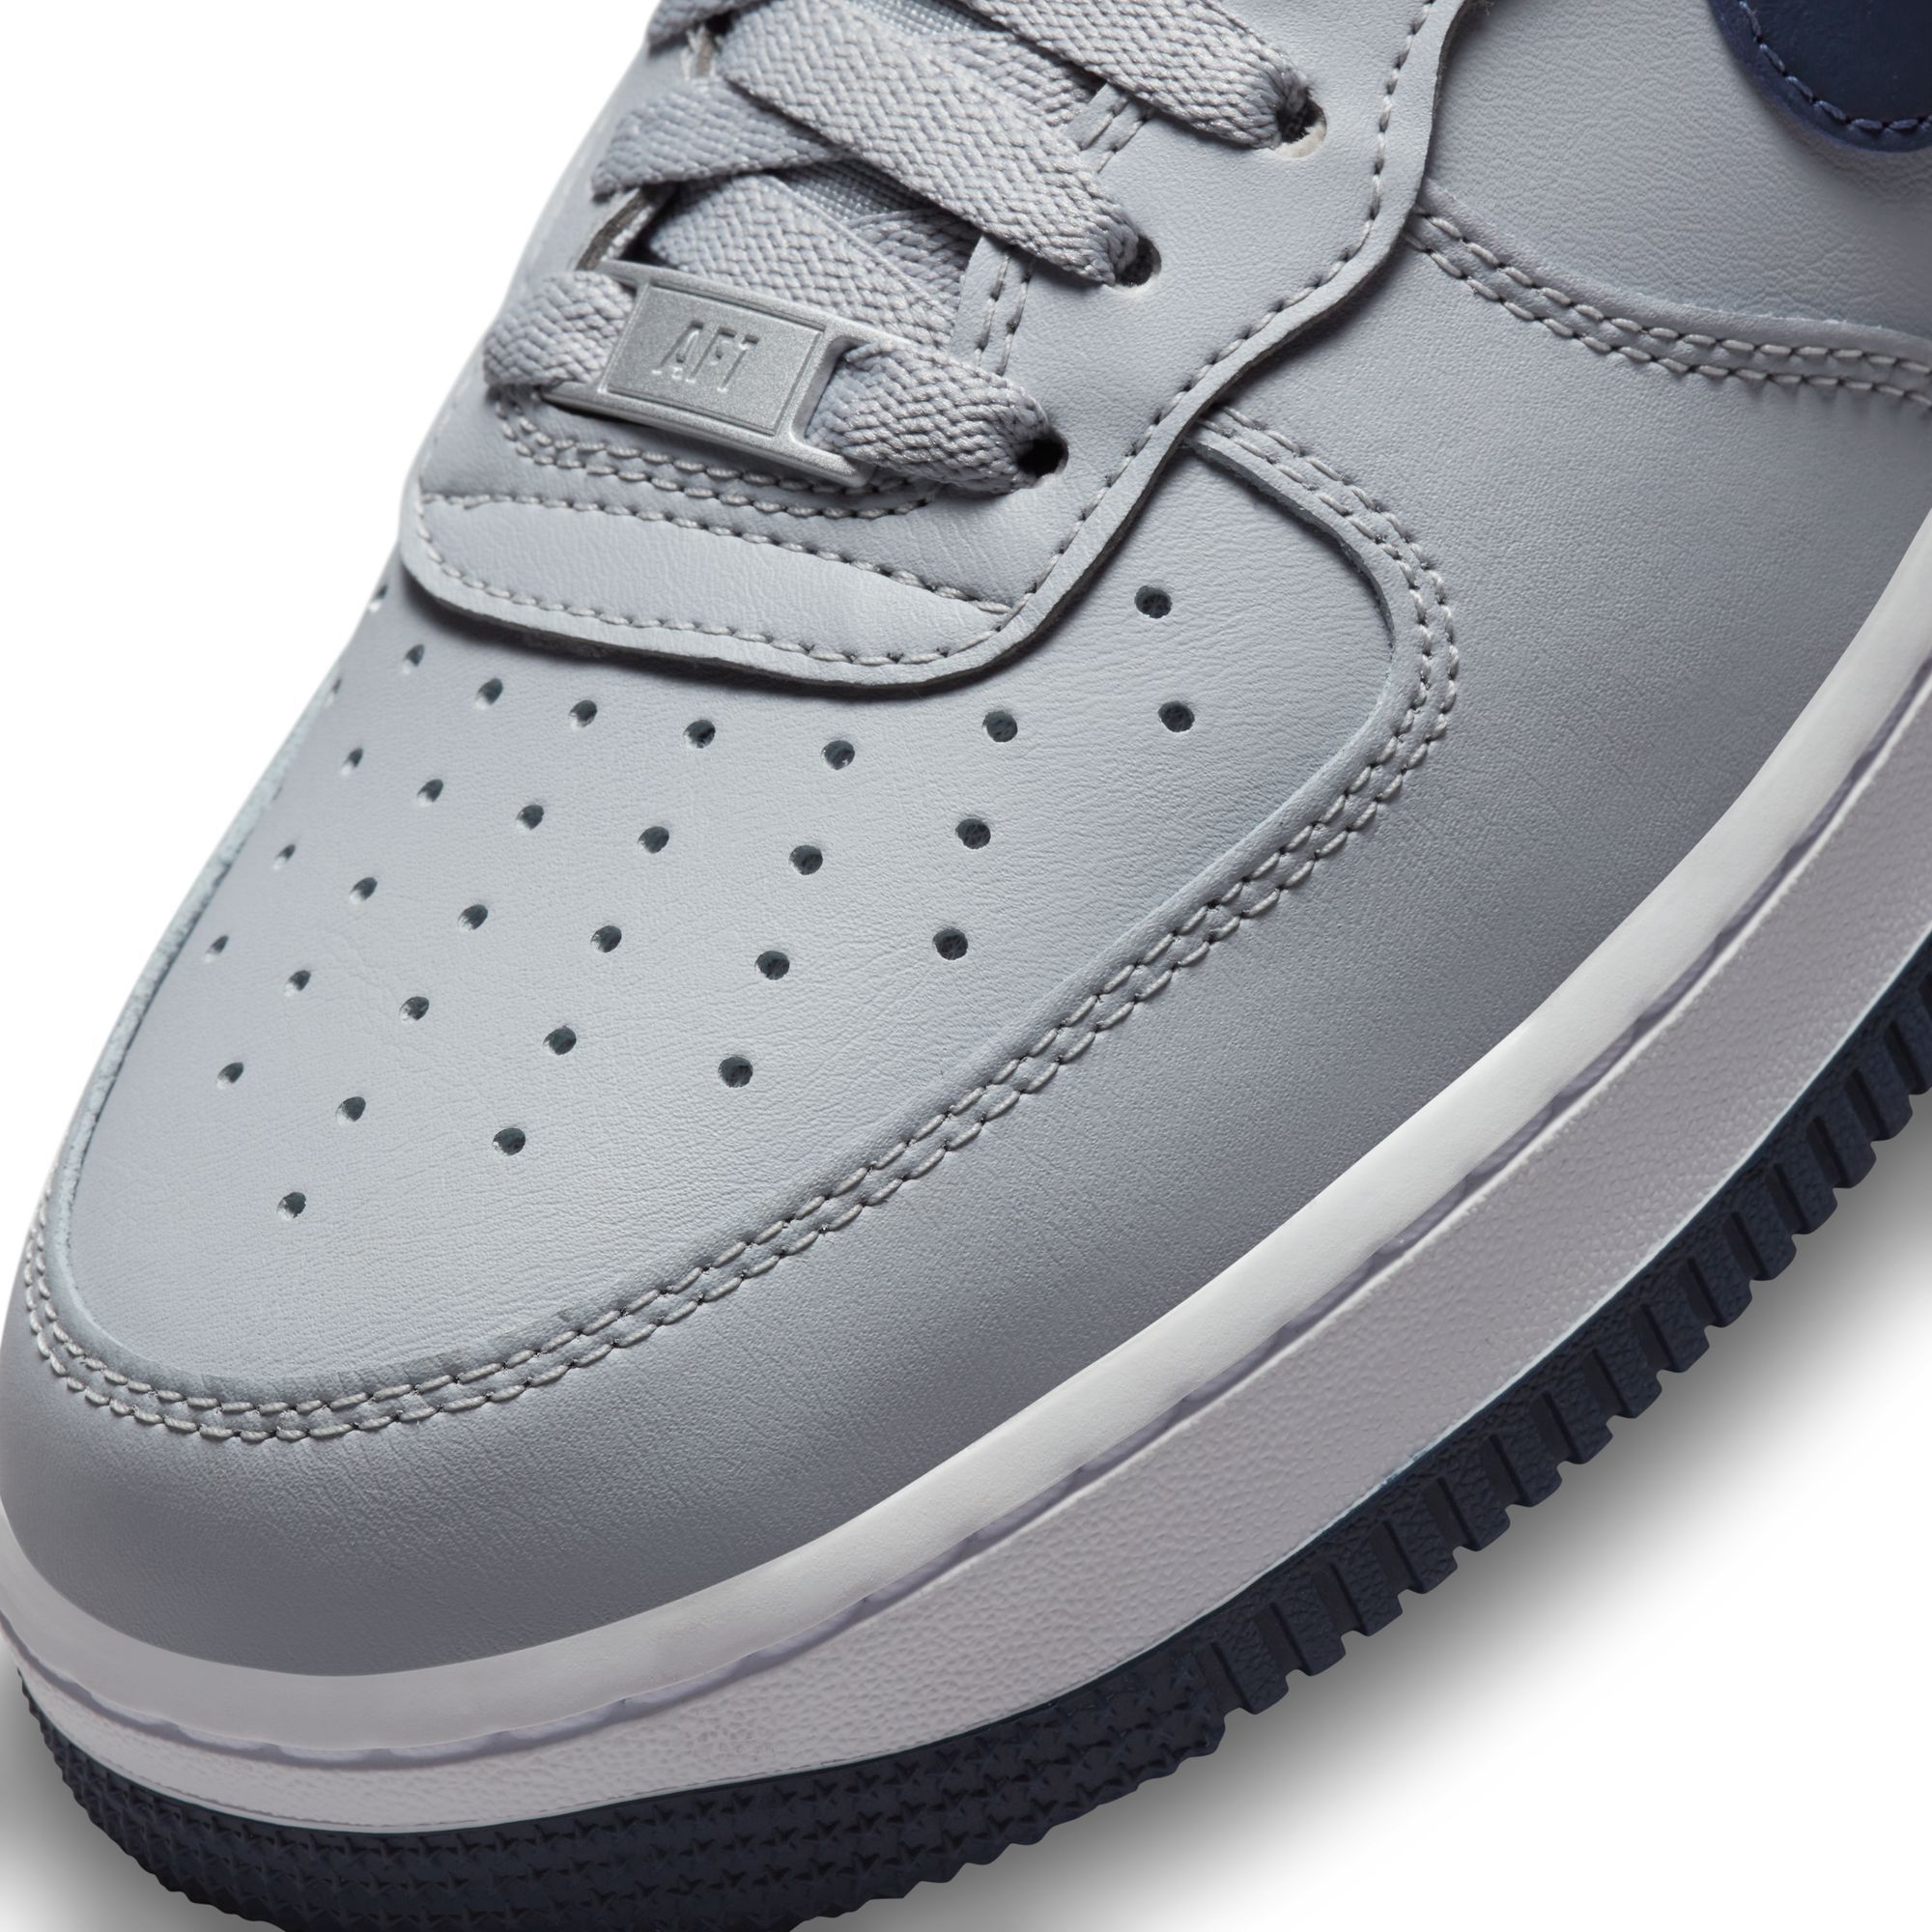 Size UK 8.5 - Nike Air Force 1 LV8 Patriots for sale online